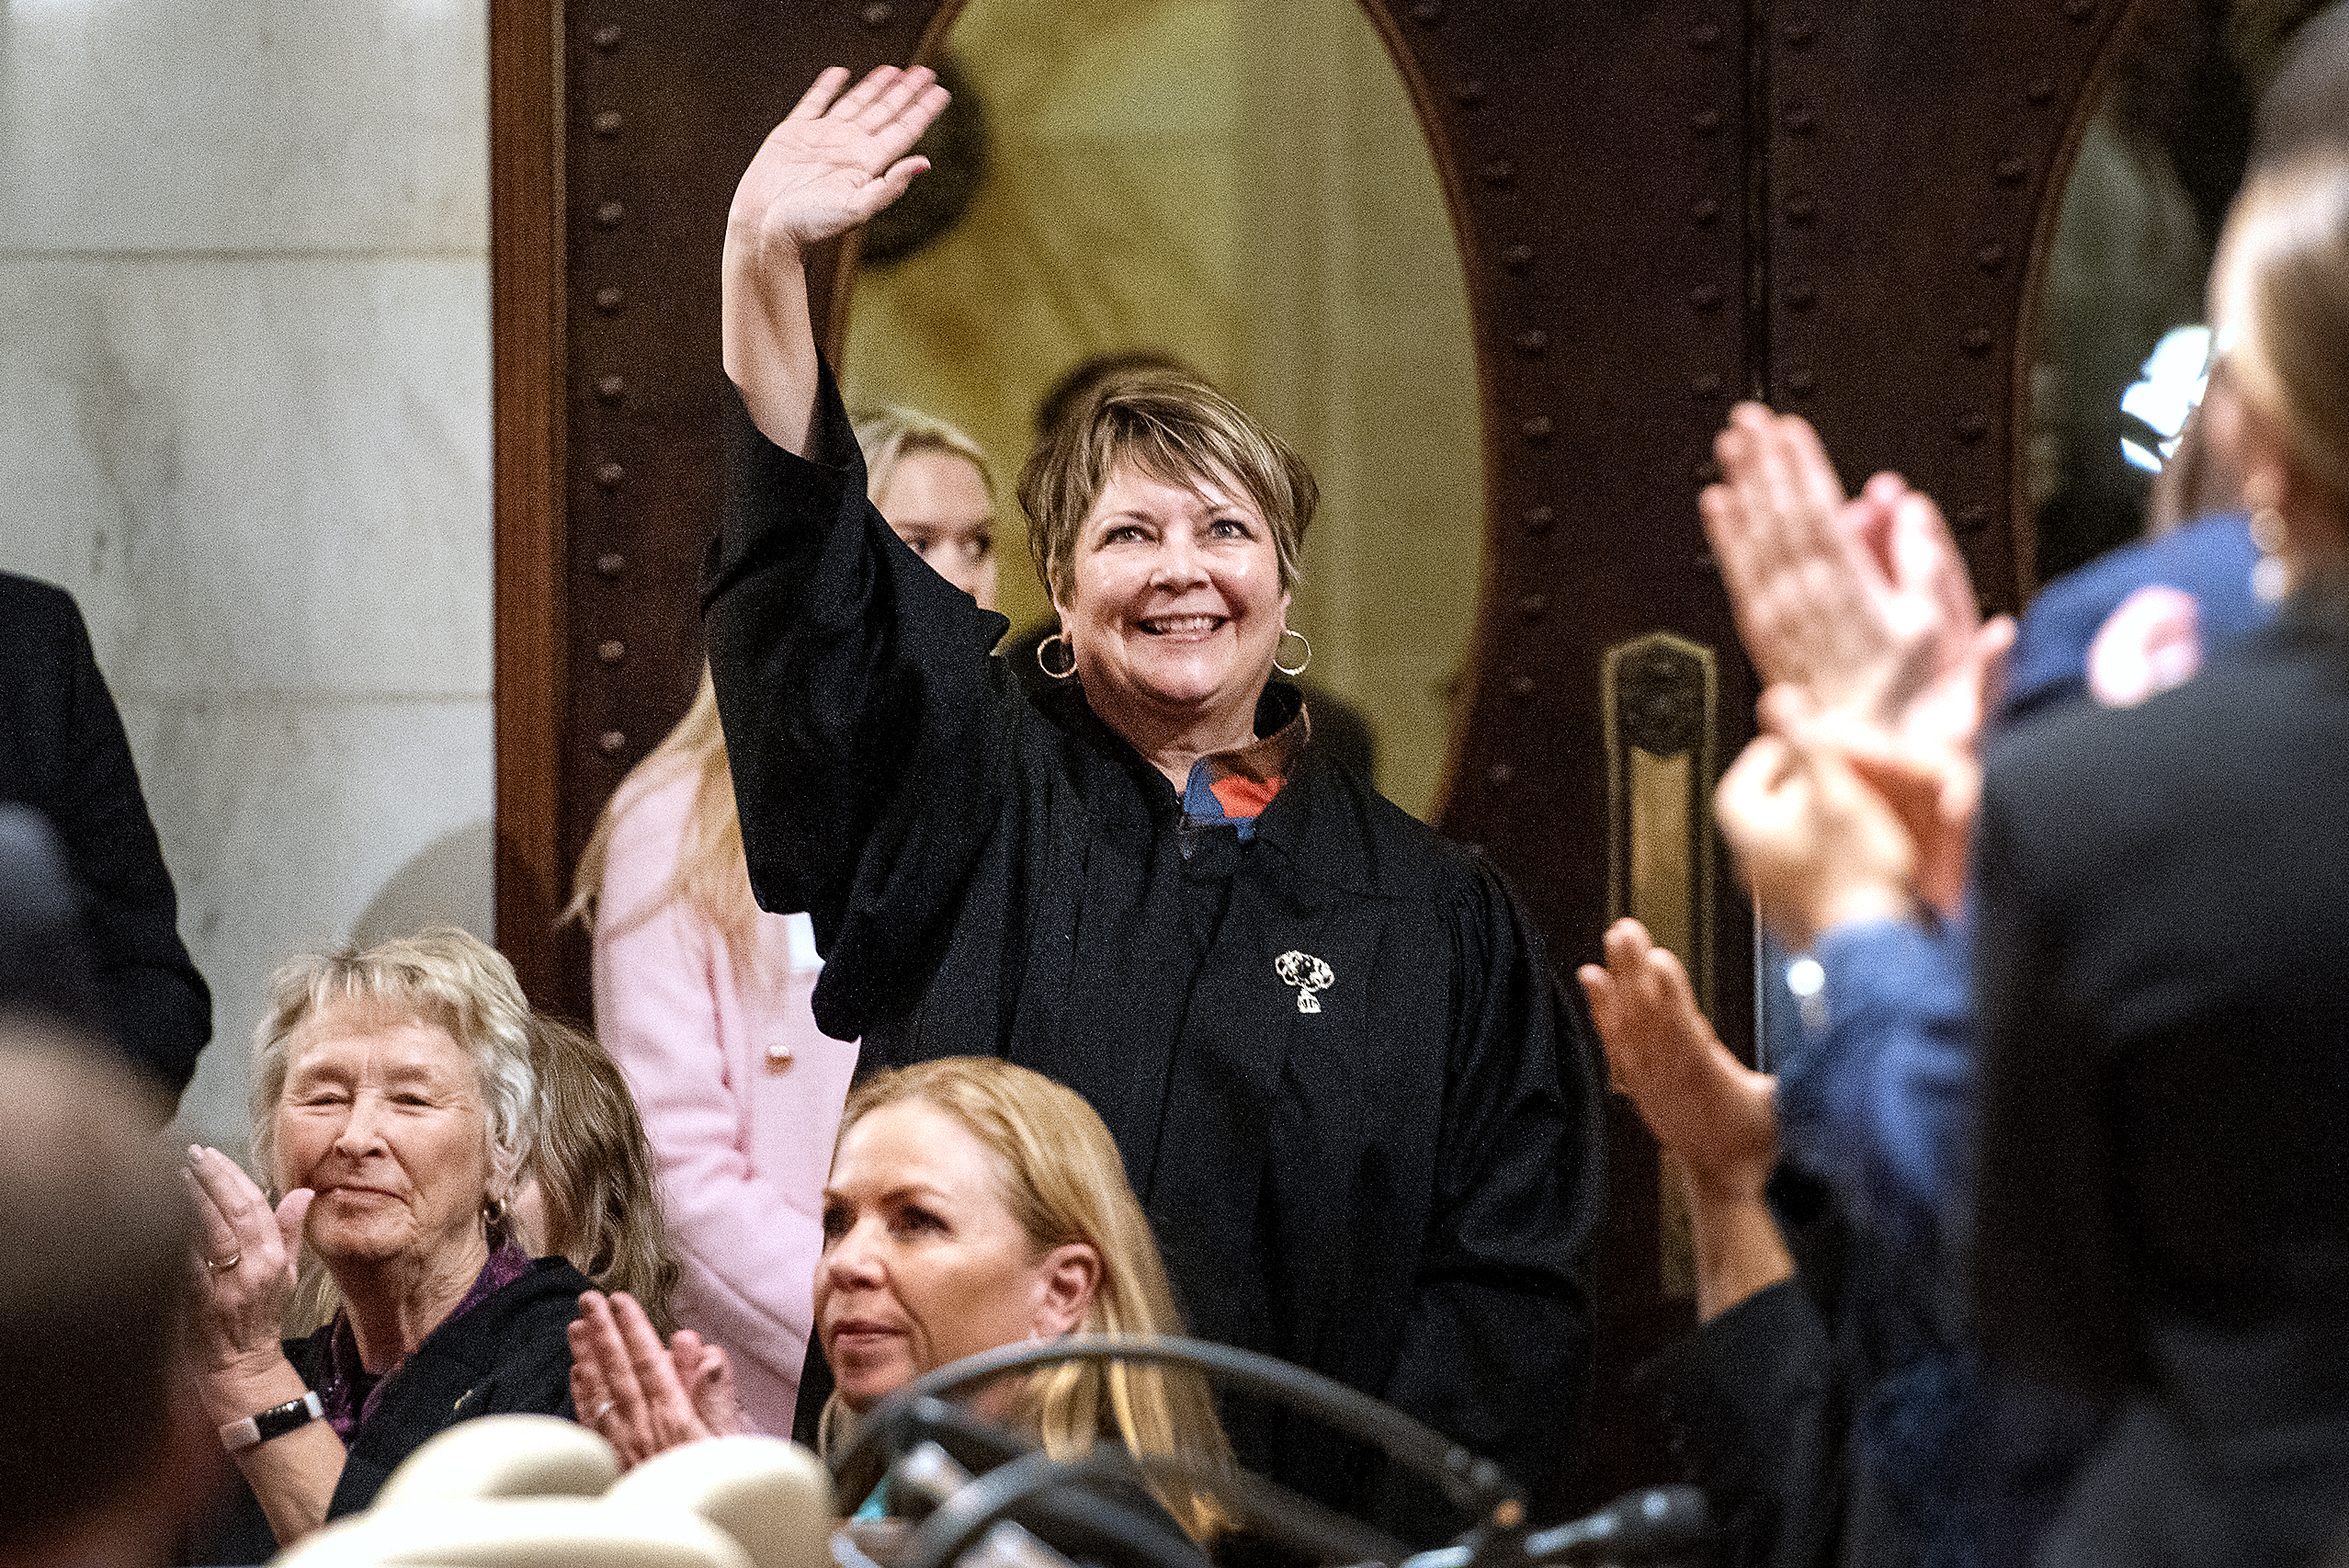 Wisconsin Supreme Court Justice Janet Protasiewicz smiles as she waves to the other attendees.